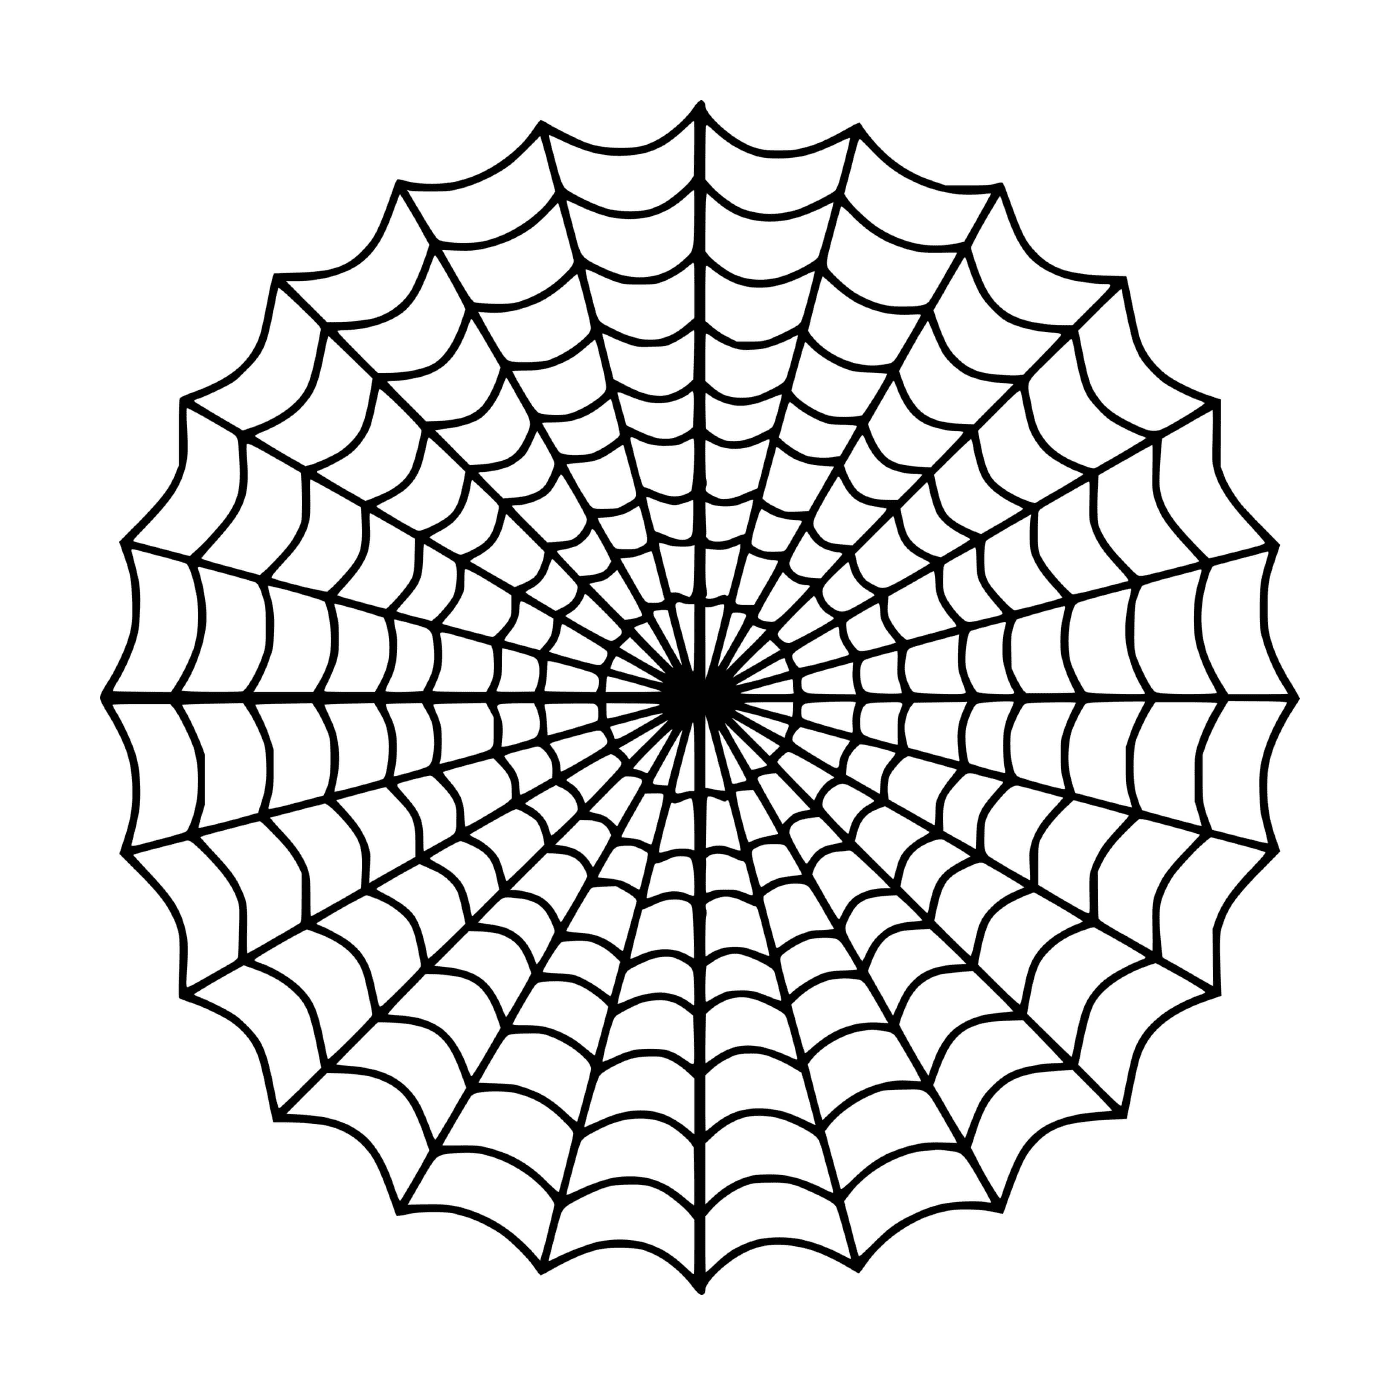  A spider web is shown 